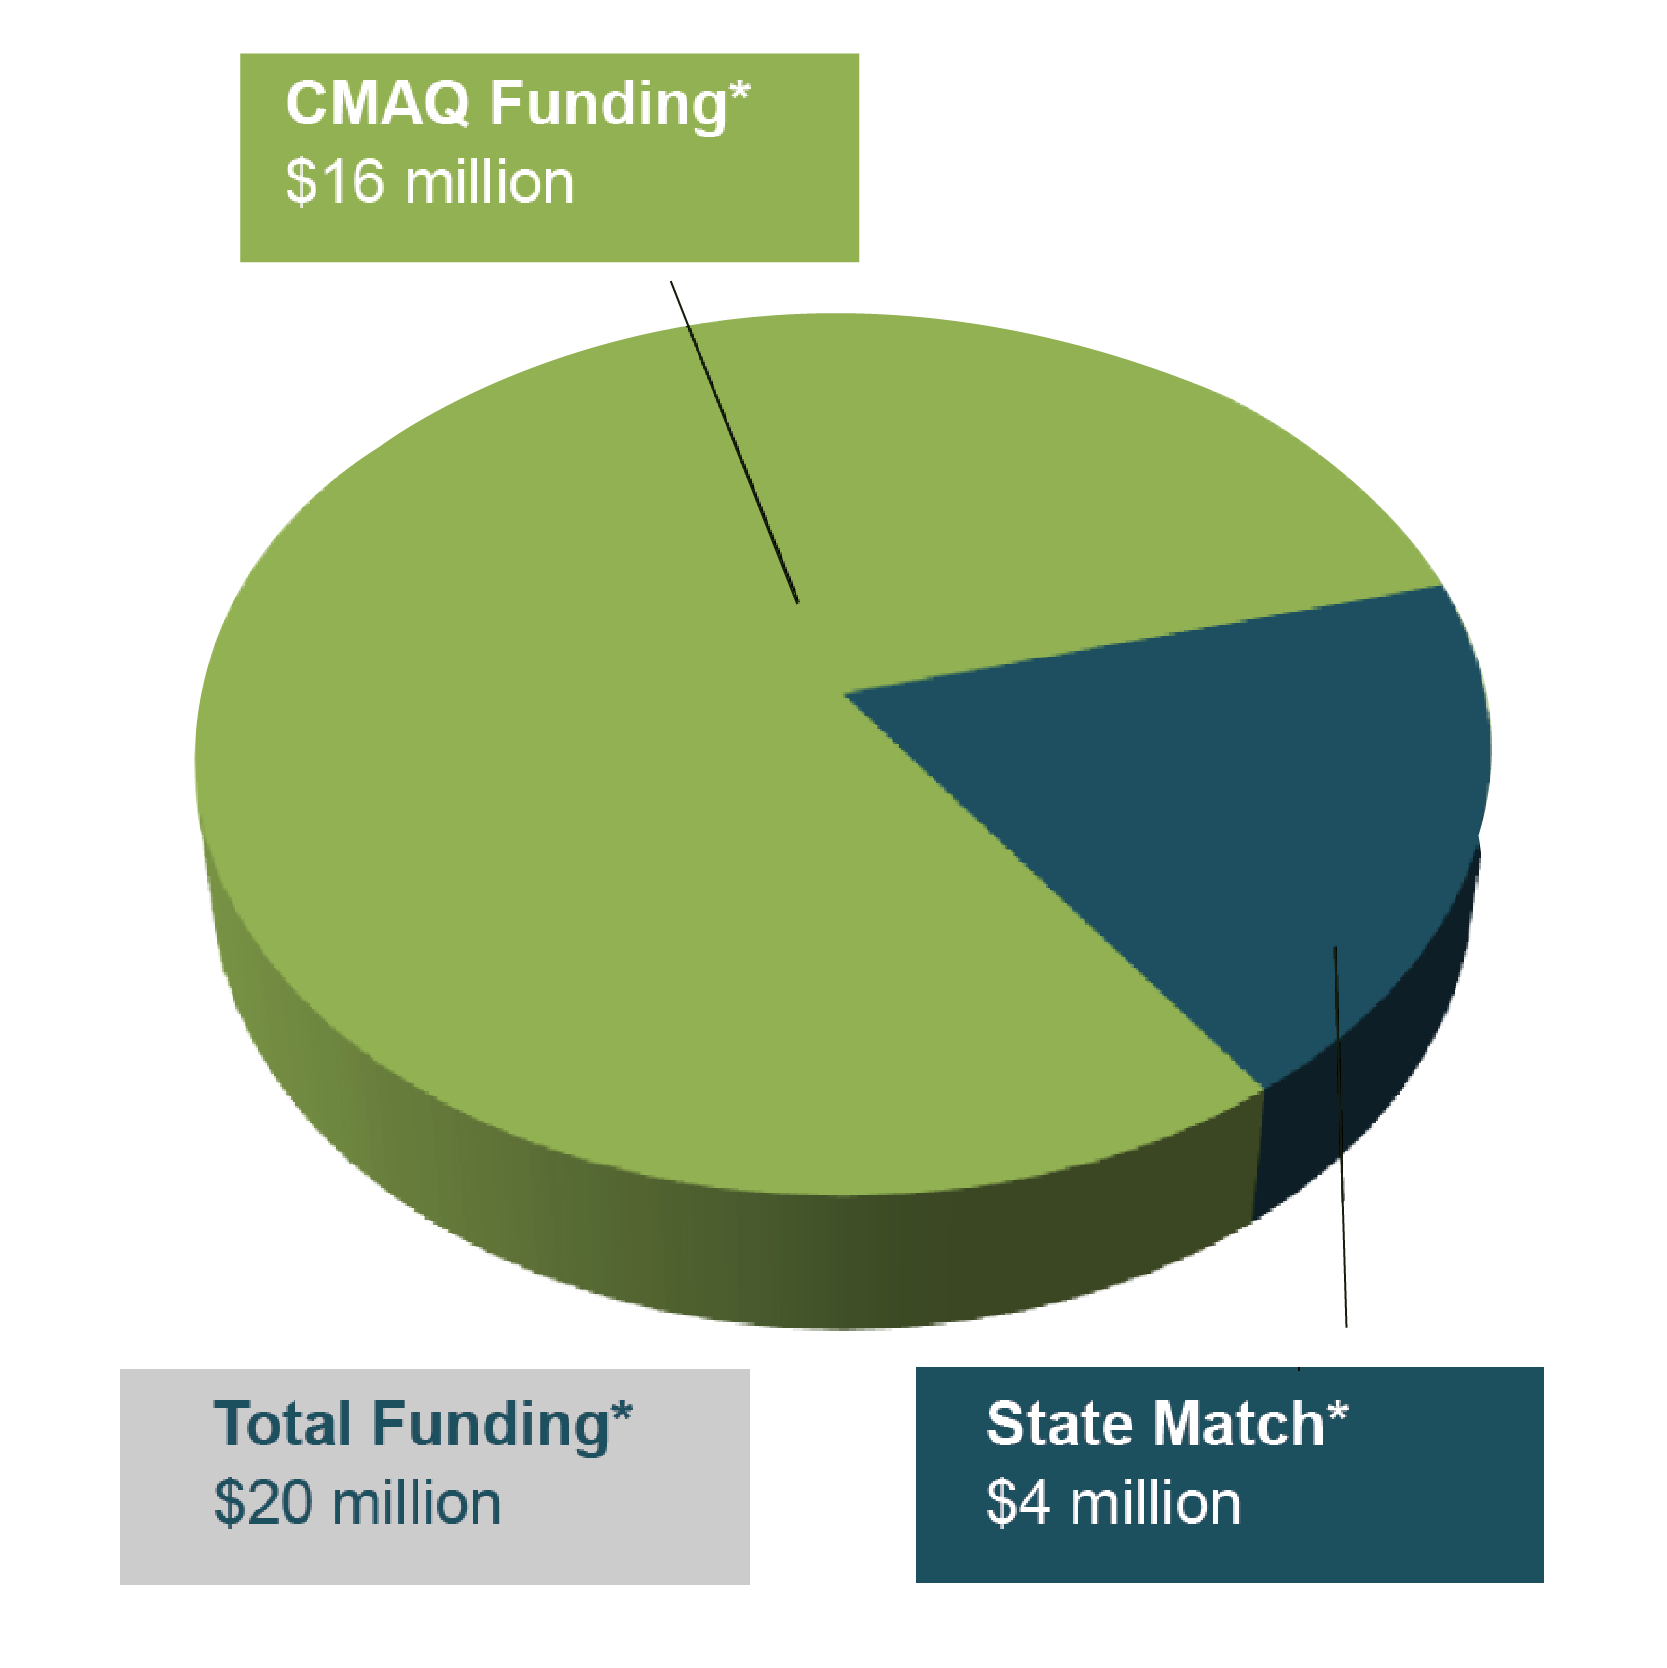 This pie chart shows $16 million CMAQ funding and $4 million state match as a proportion of the total $20 million project funding.